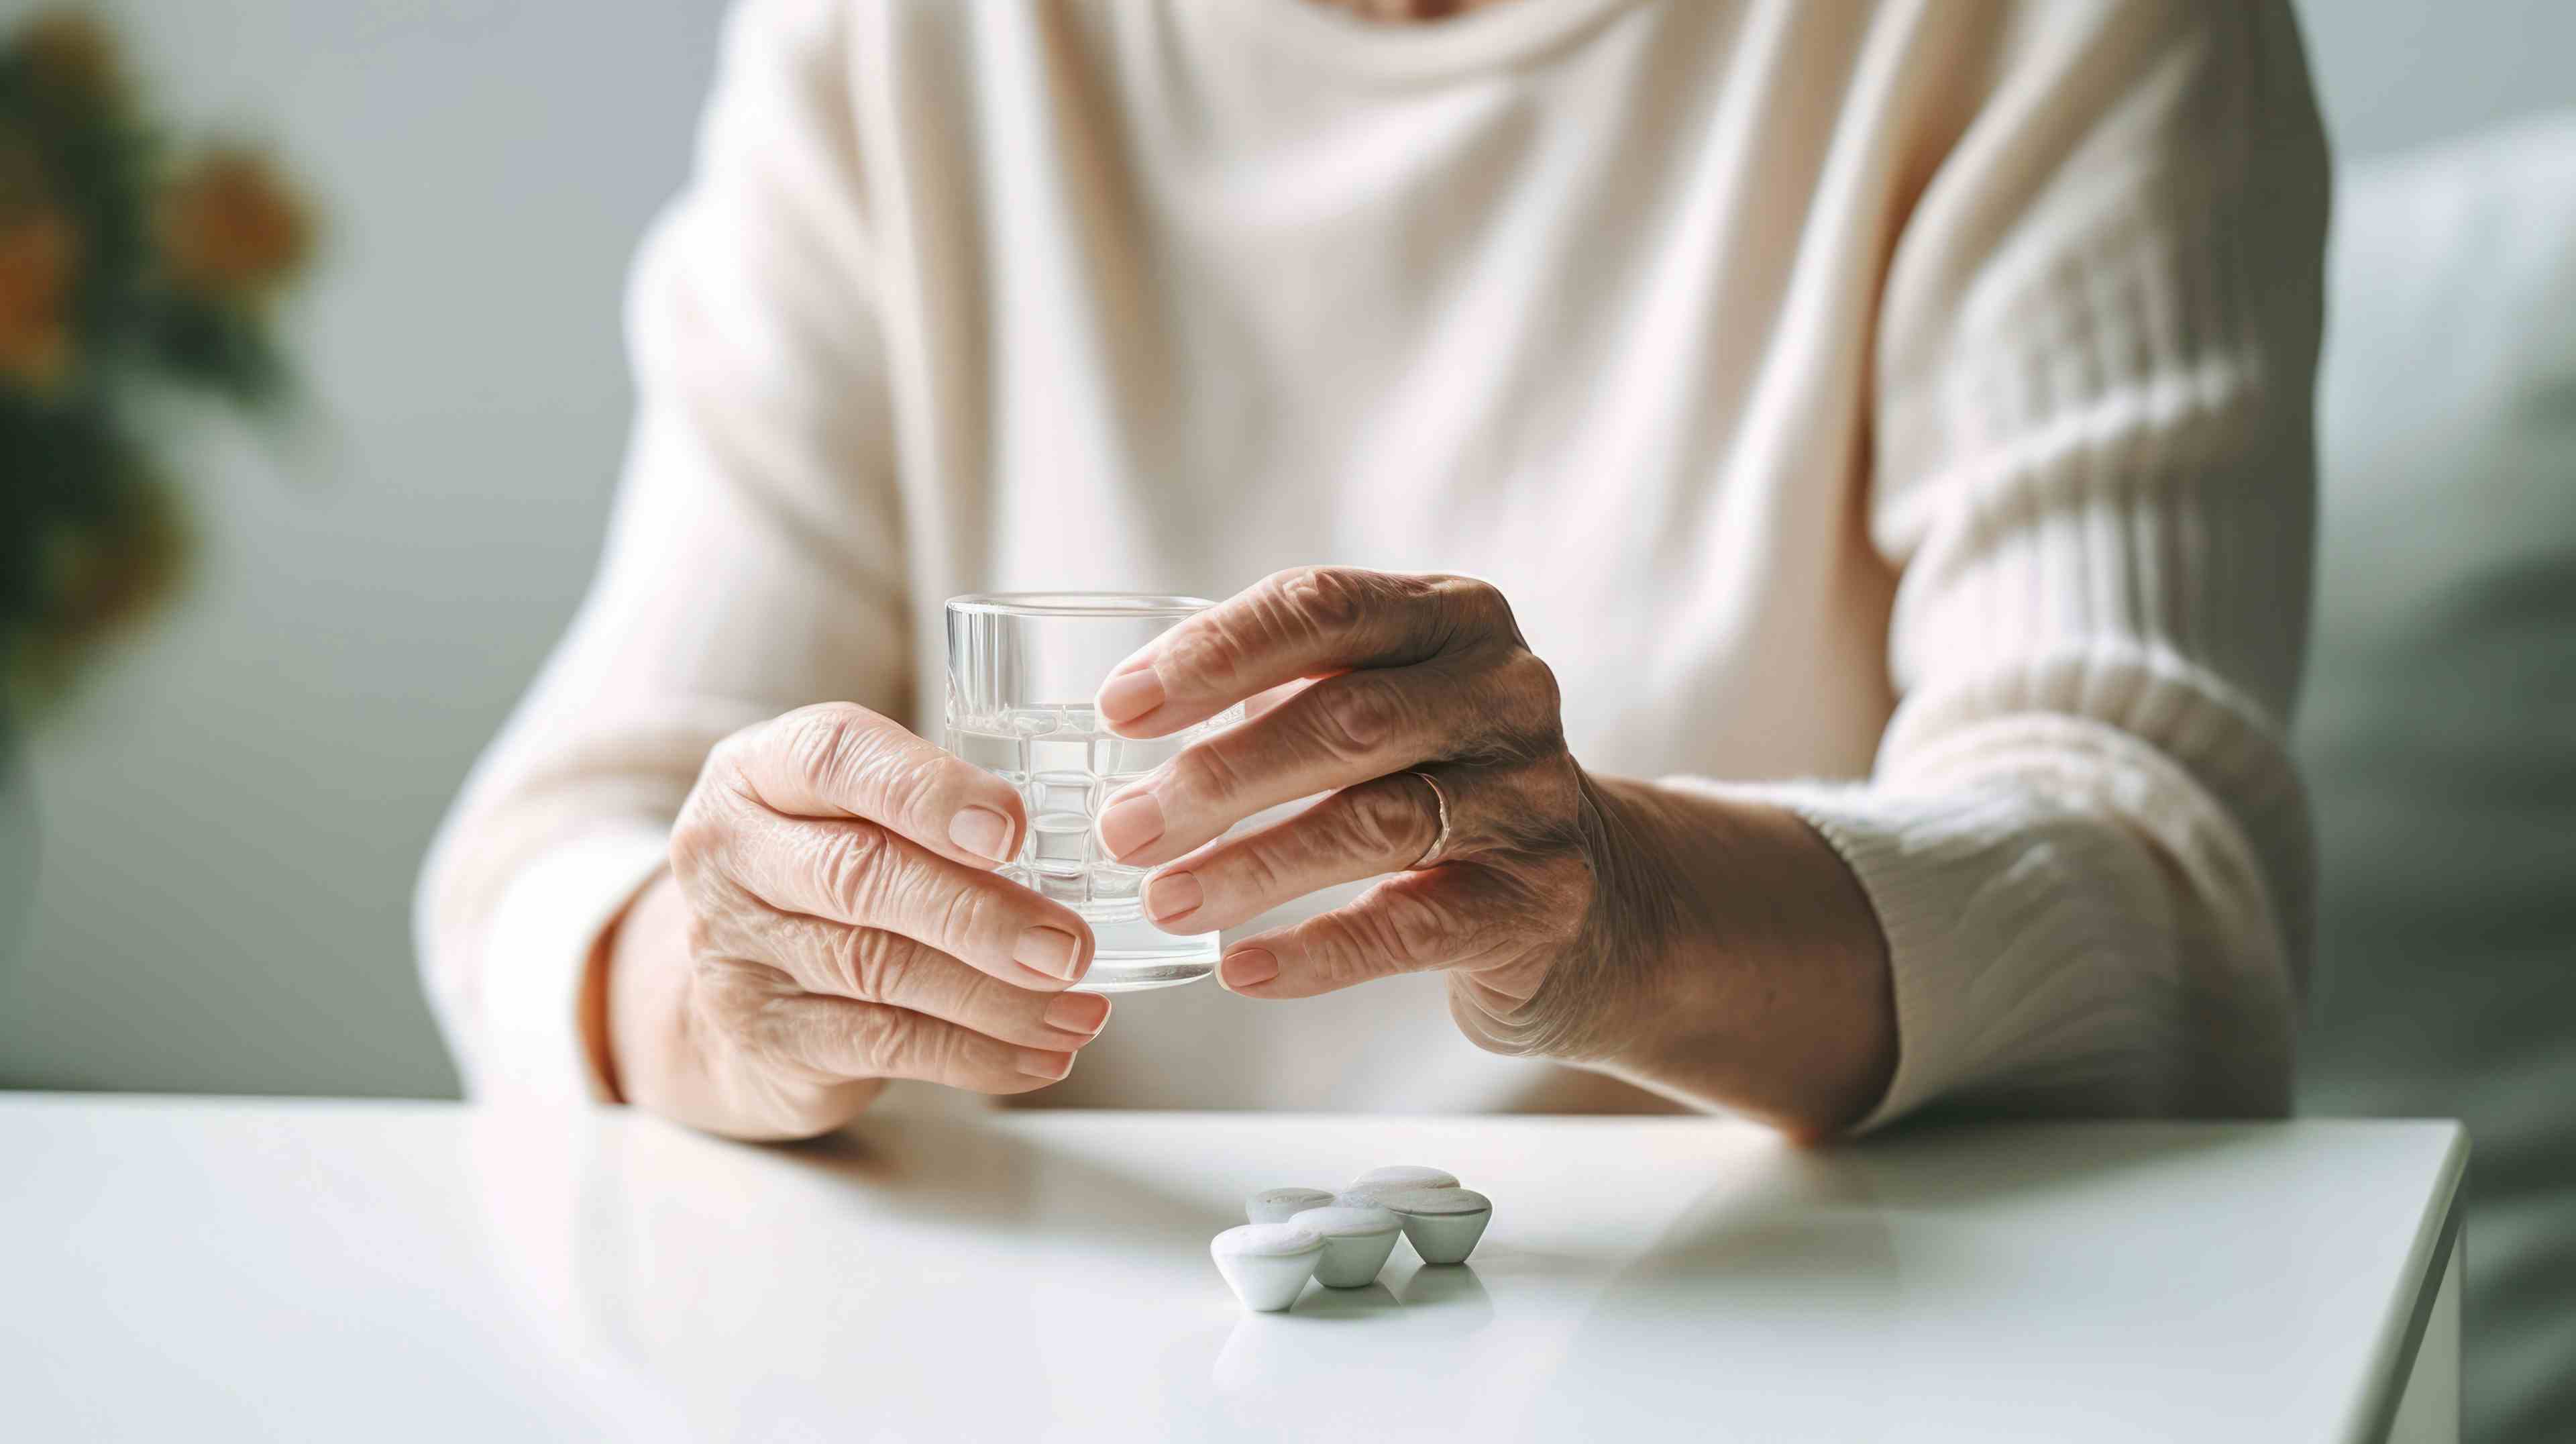 Old woman taking a pill at home, healthcare and treatment concept. | Image Credit: © sawitreelyaon - stock.adobe.com